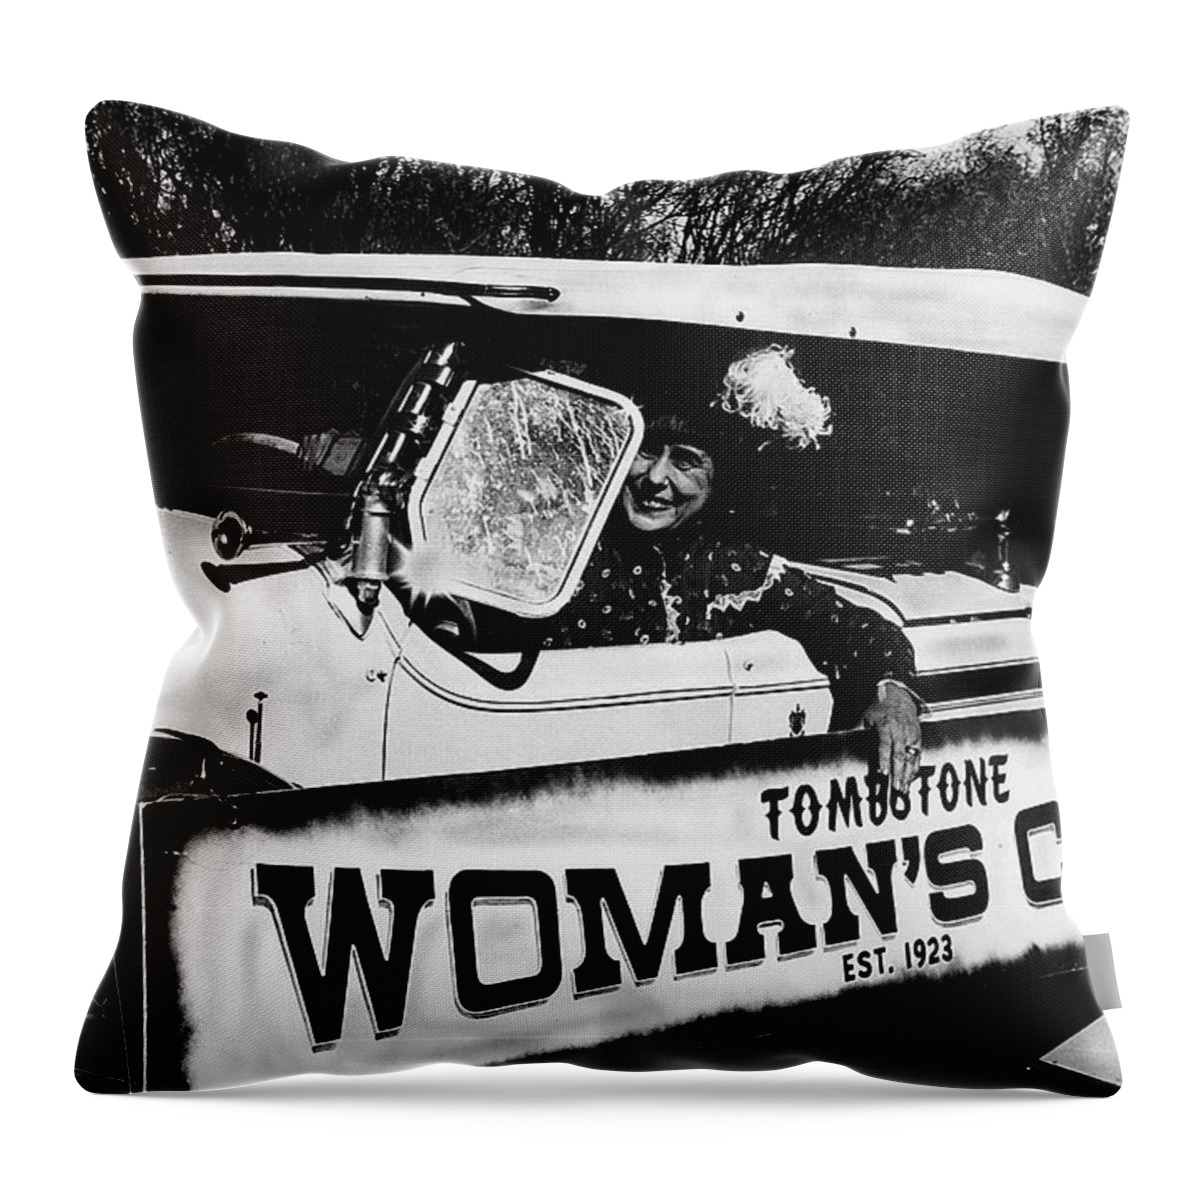 Car And Driver In Helldorado Days Parade In Tombstone Arizona 1967 Throw Pillow featuring the photograph Car and driver in Helldorado Days parade in Tombstone Arizona 1967 by David Lee Guss